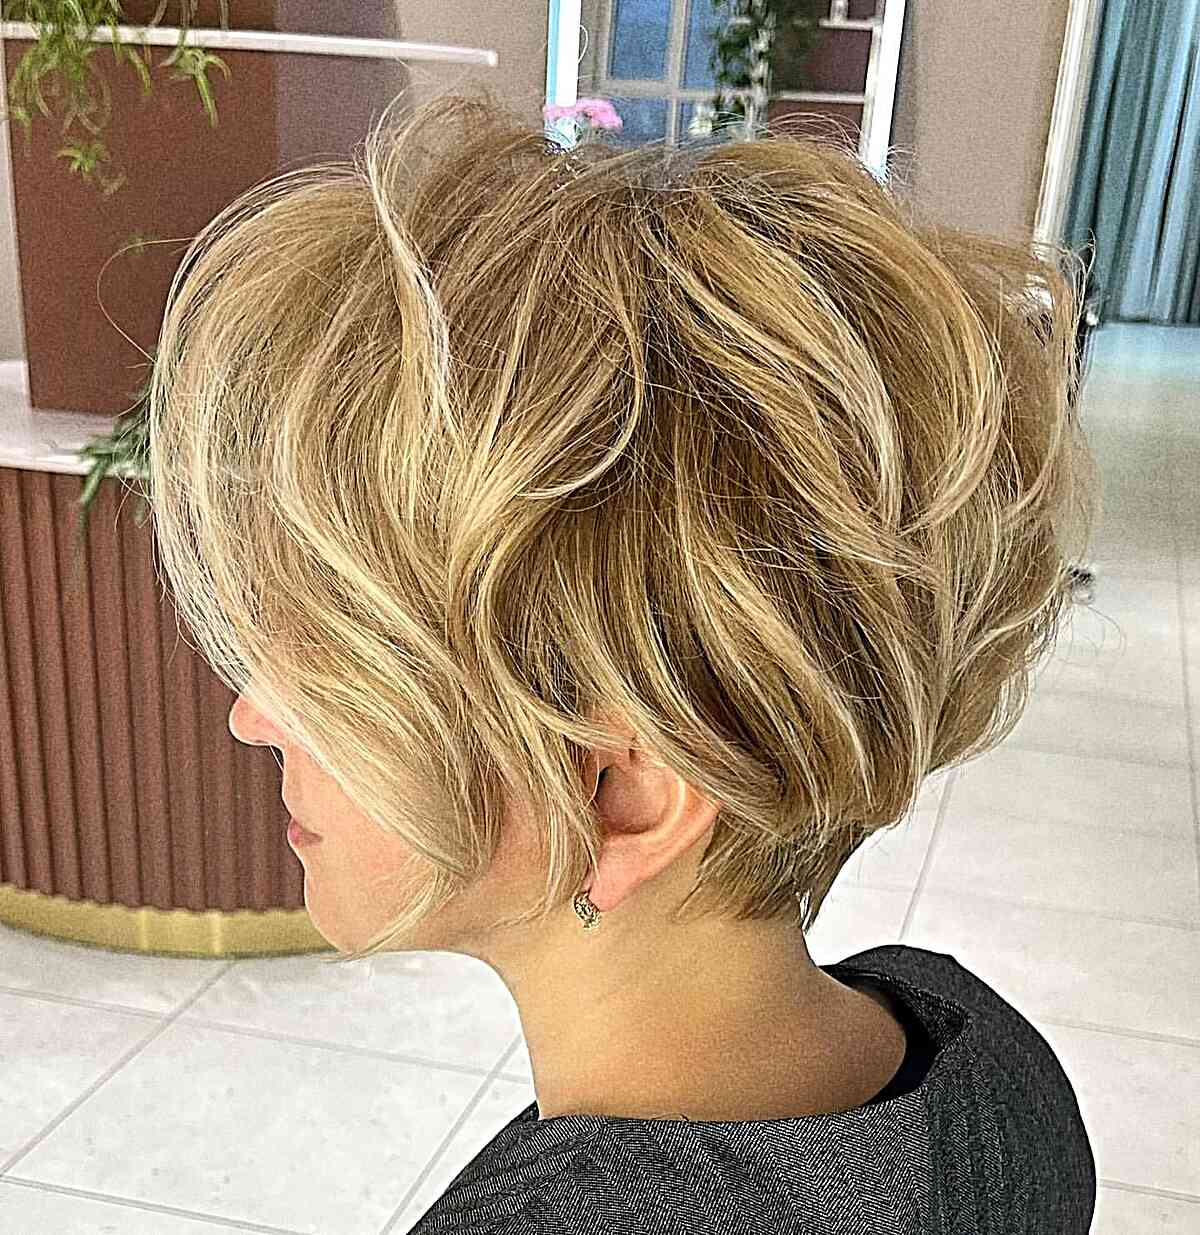 Short Blonde Messy Hairdo for women with thick hair